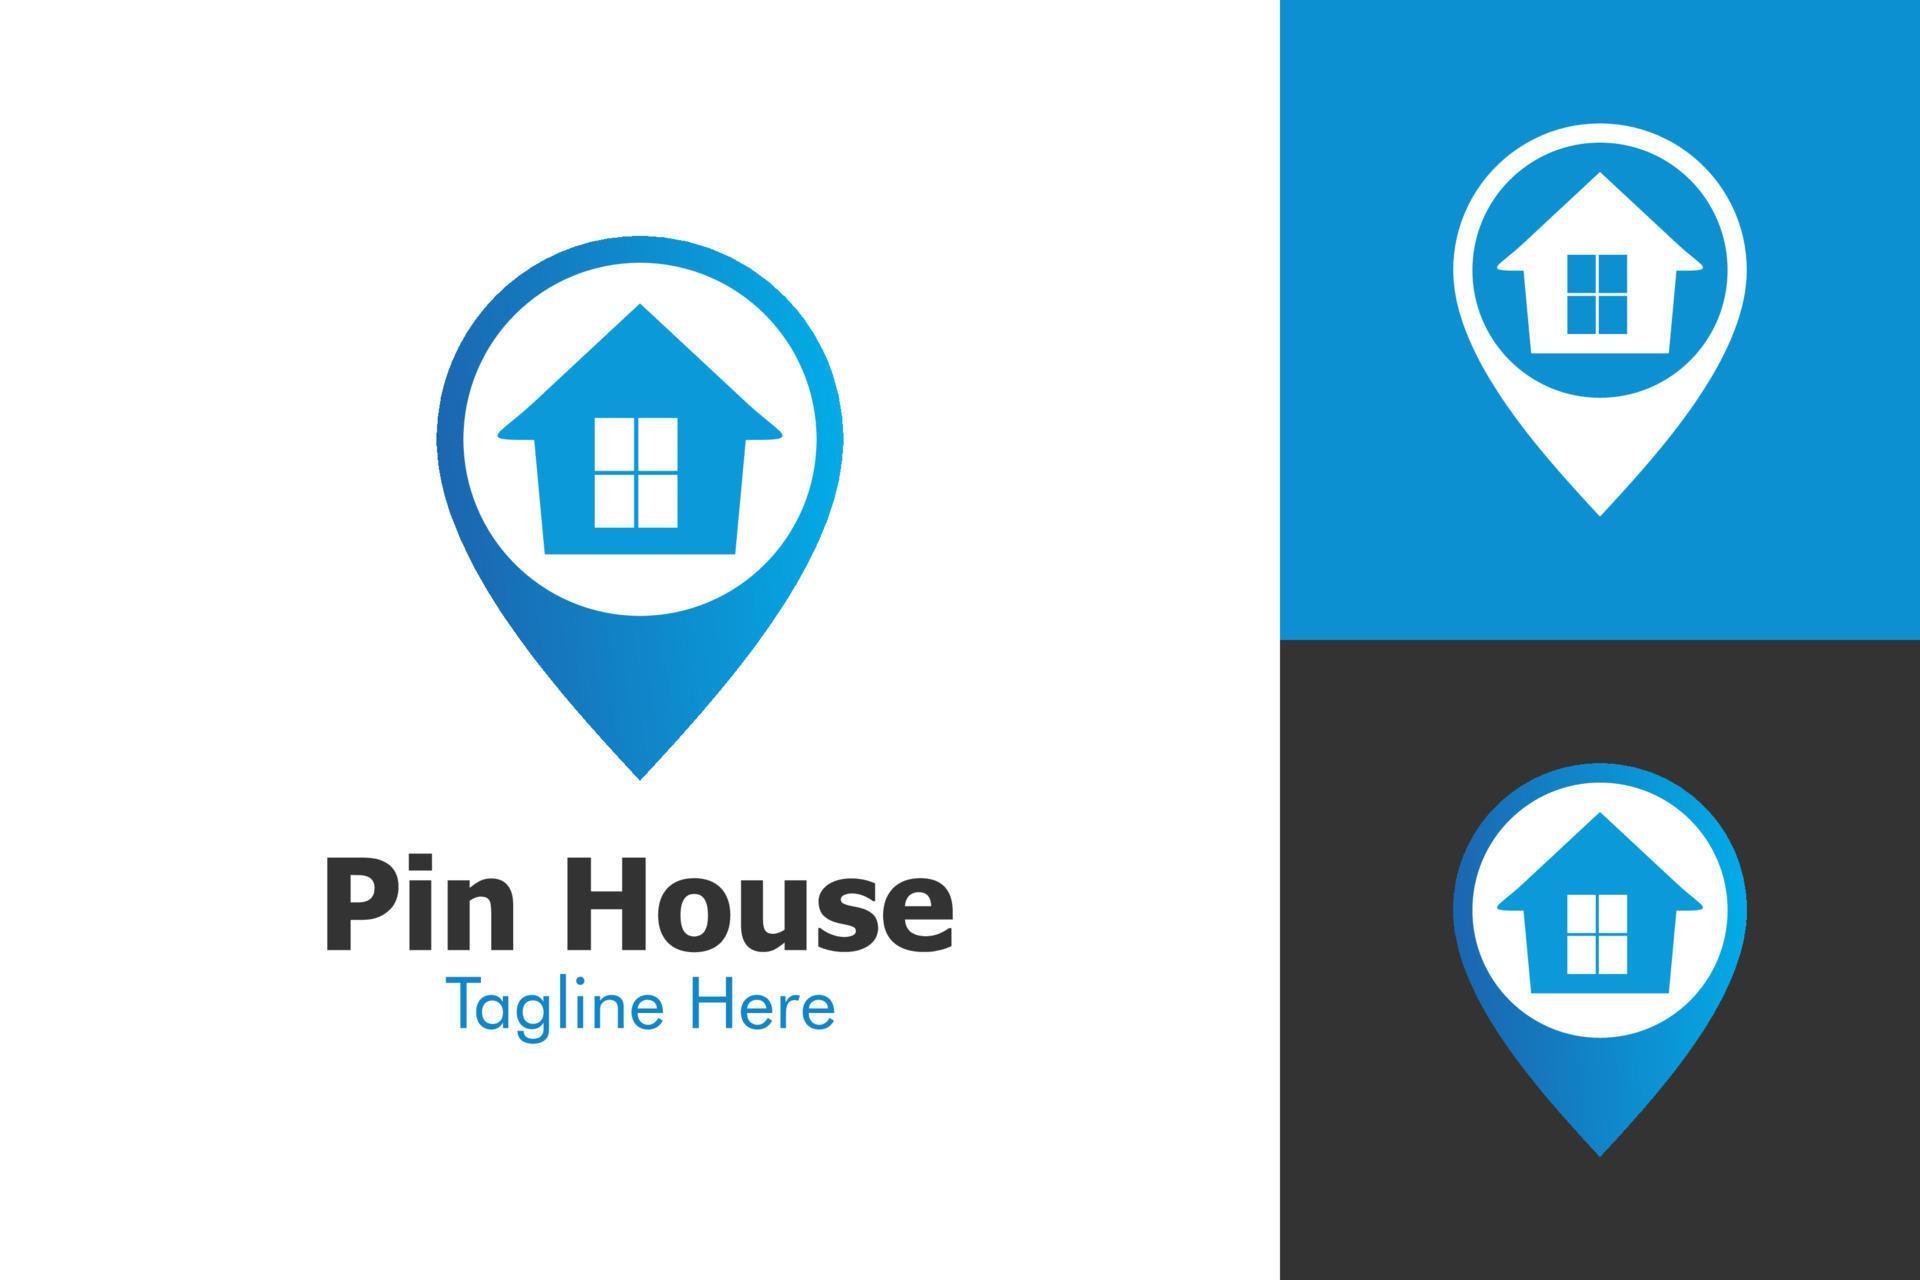 Illustration Vector Graphic Of Pin House Logo Perfect To Use For